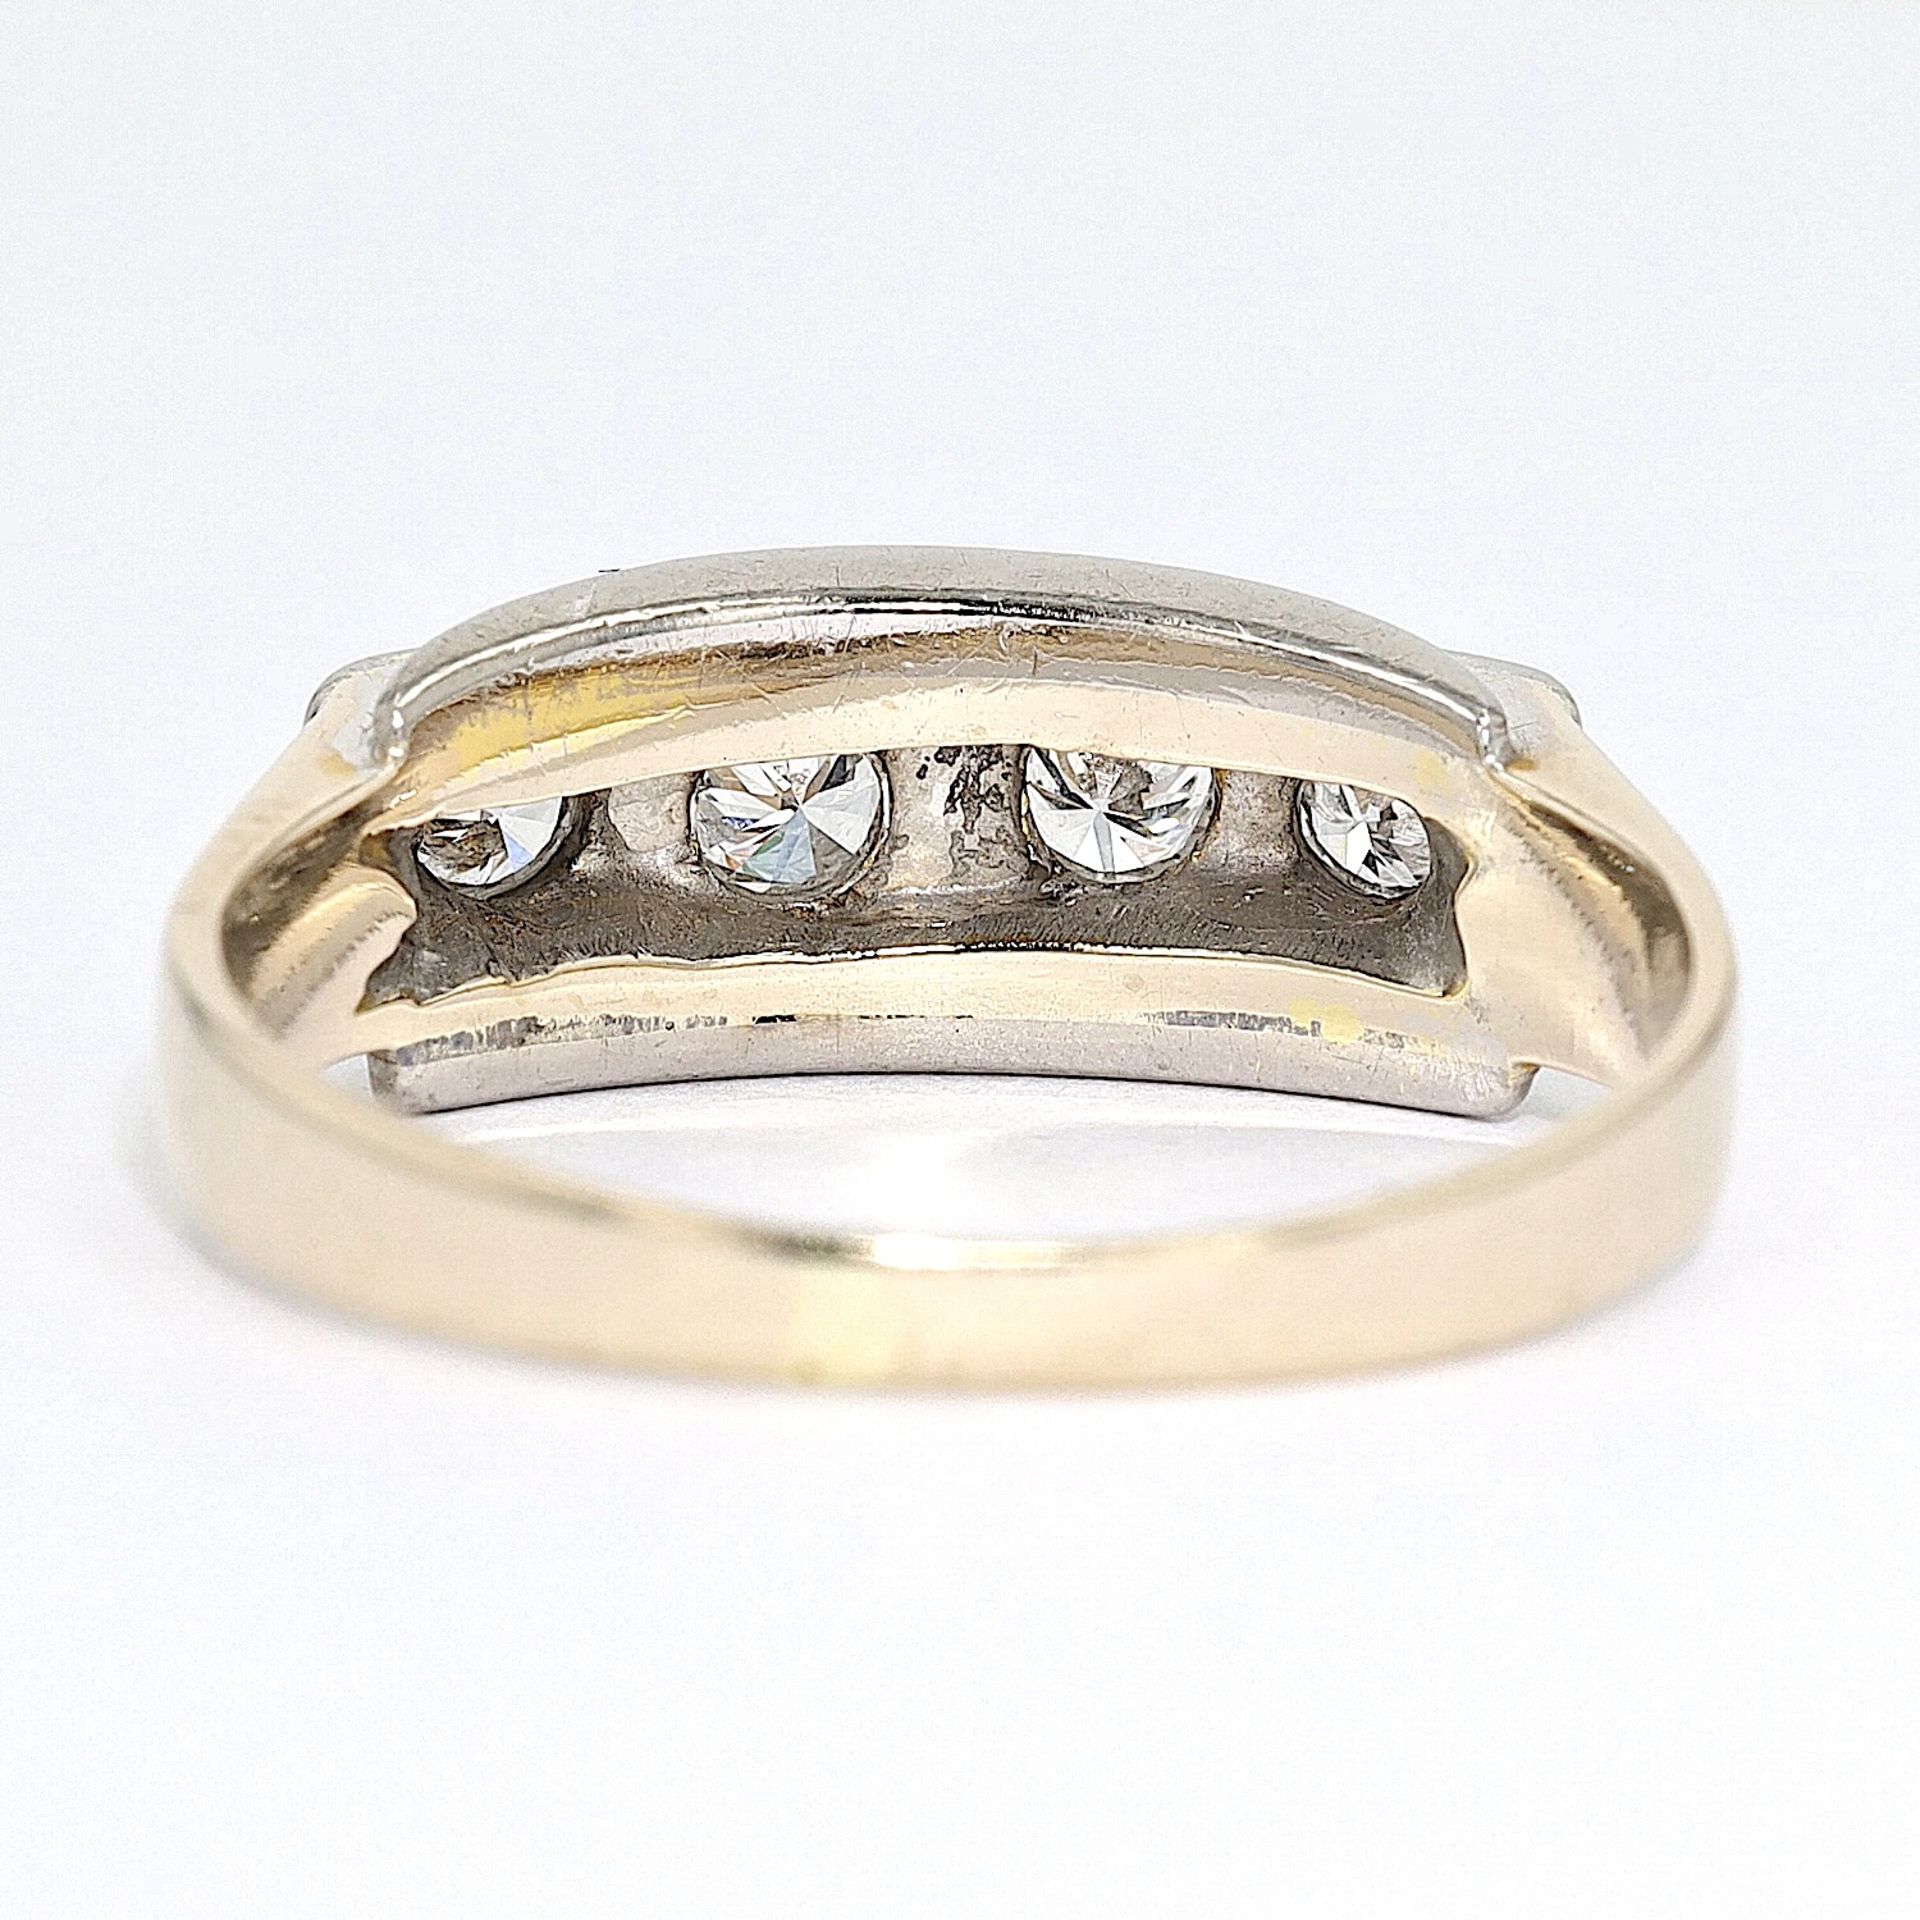 Ring 585 gold with brilliants - Image 4 of 5